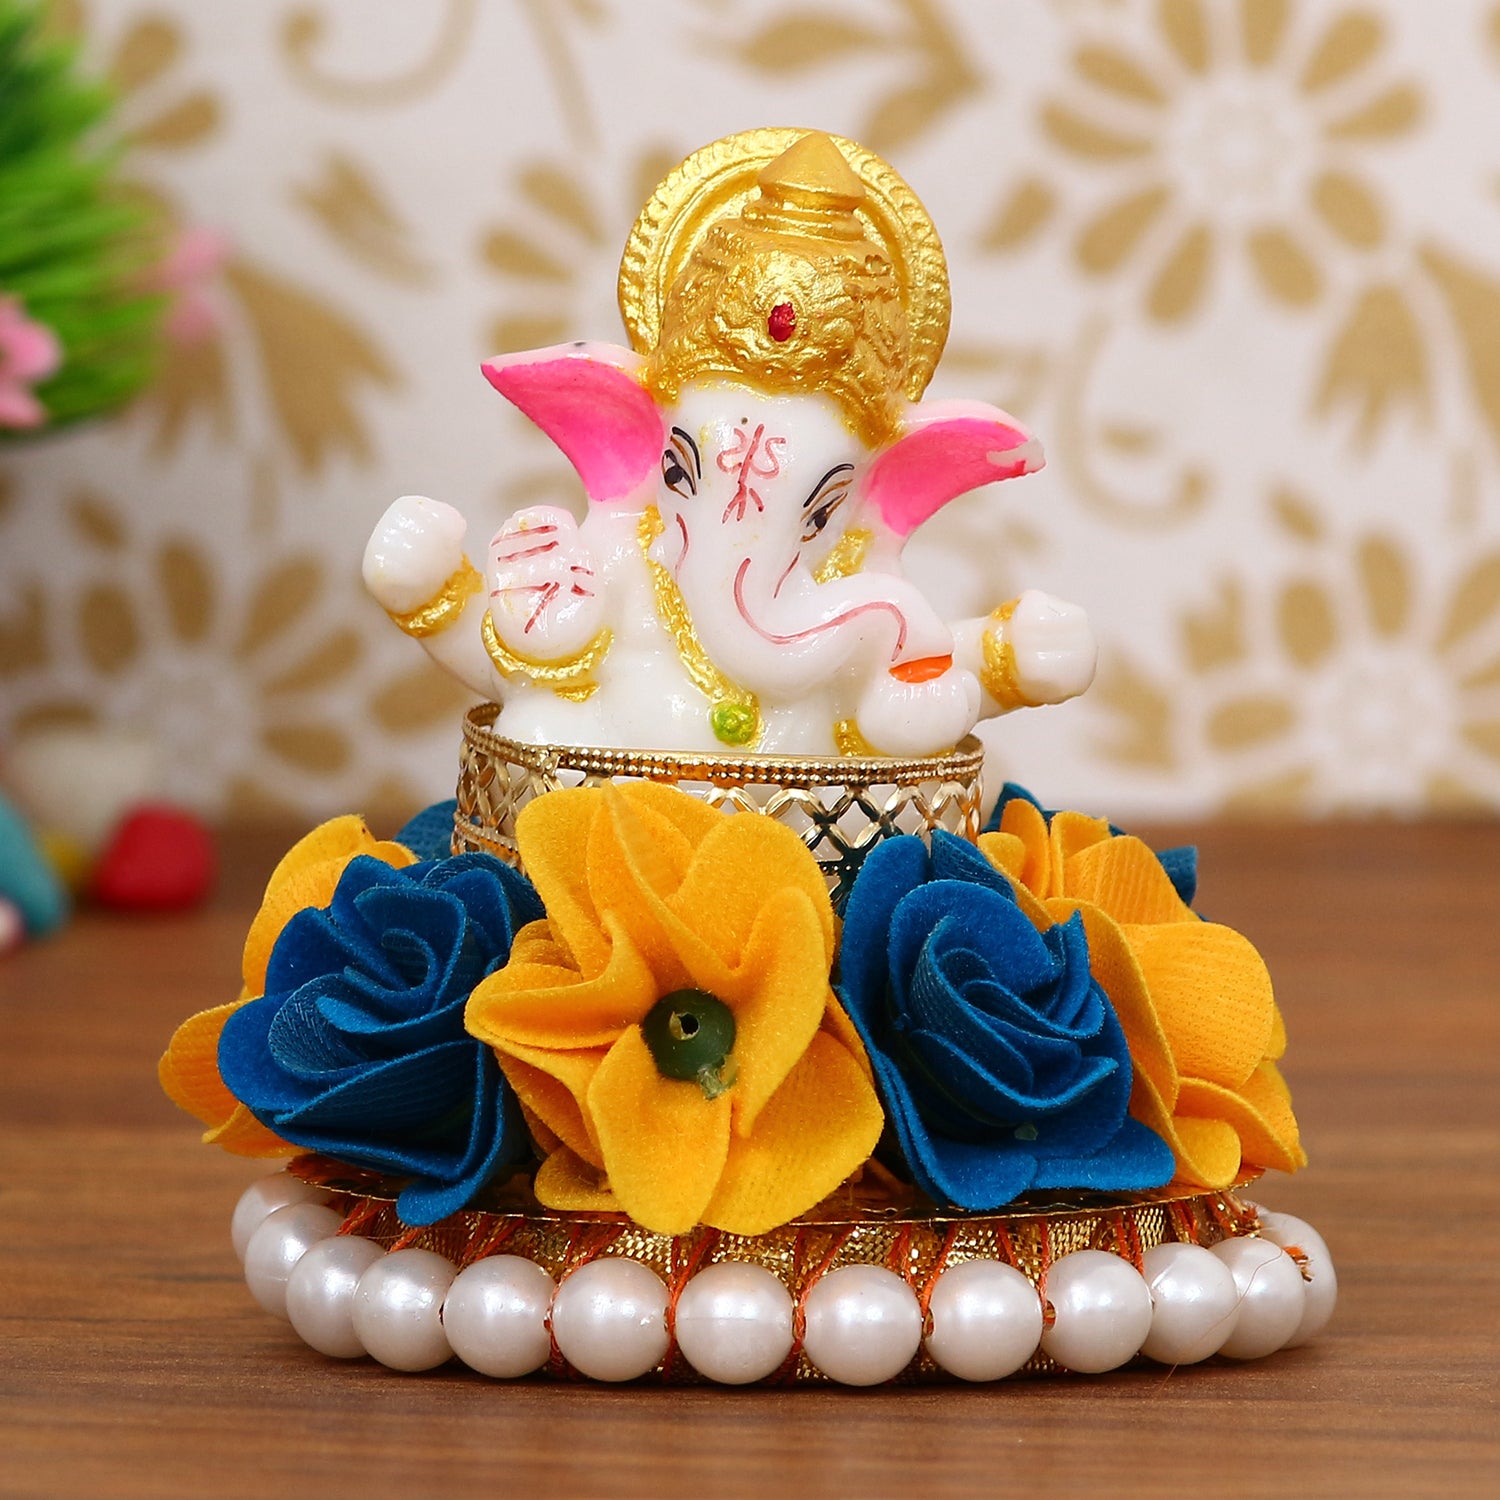 Lord Ganesha Idol on Decorative Handcrafted Plate with Yellow and Blue Flowers